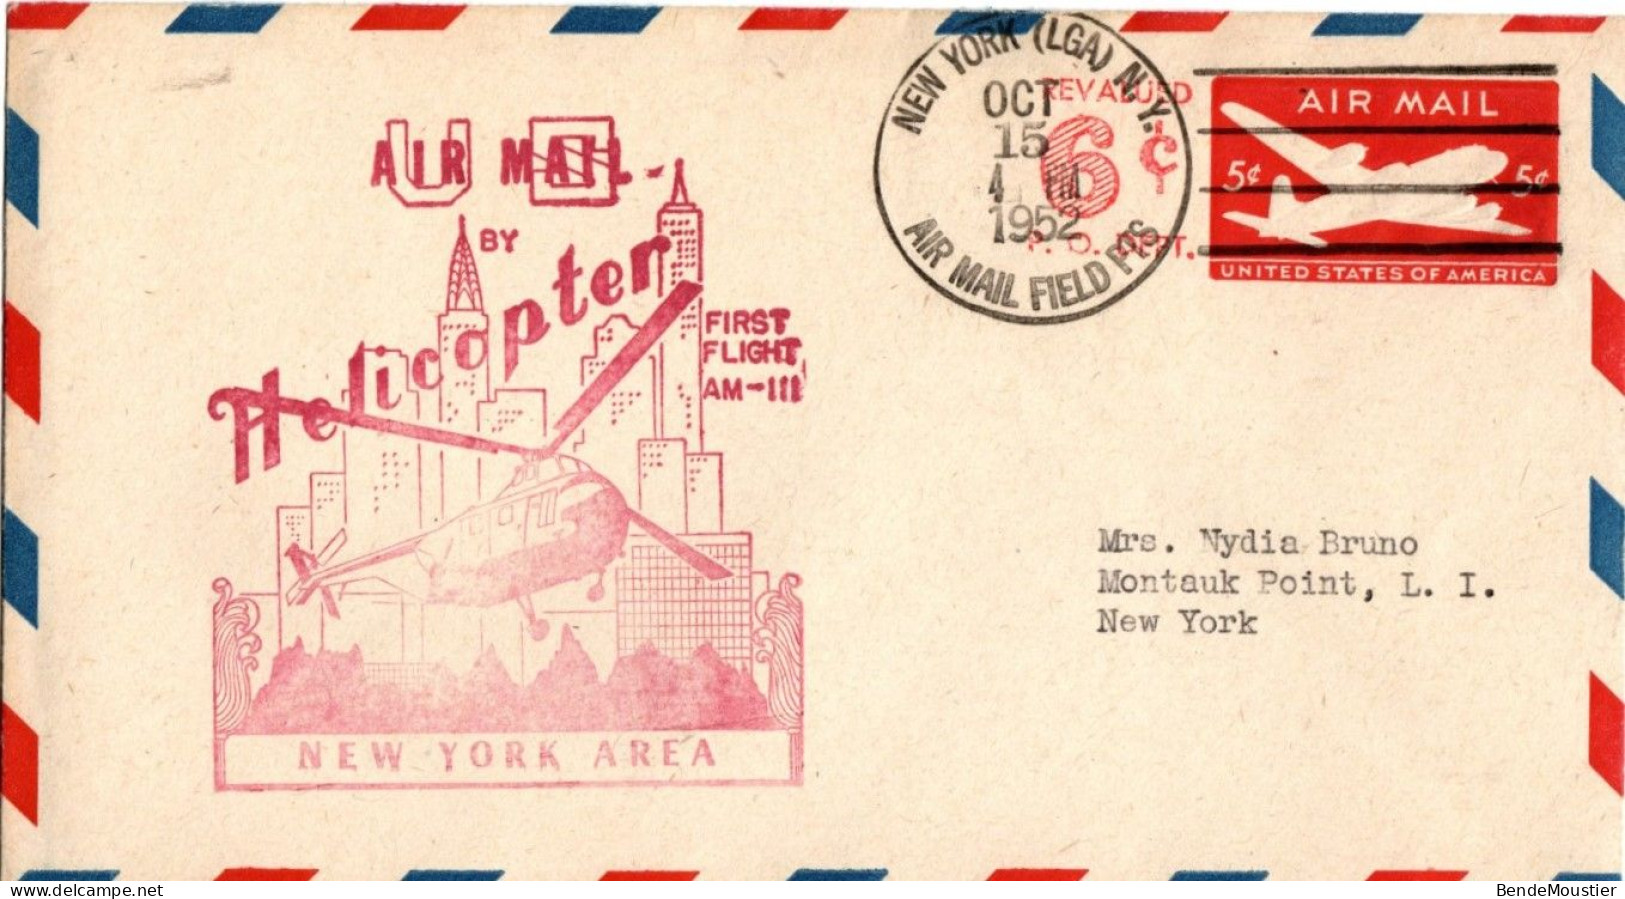 (N62) USA SCOTT # UC19 - Air Mail Helicopter - First Flight AM III - New York (LGA) N.Y. Air Mail Field PTS - 1952 - 2c. 1941-1960 Lettres